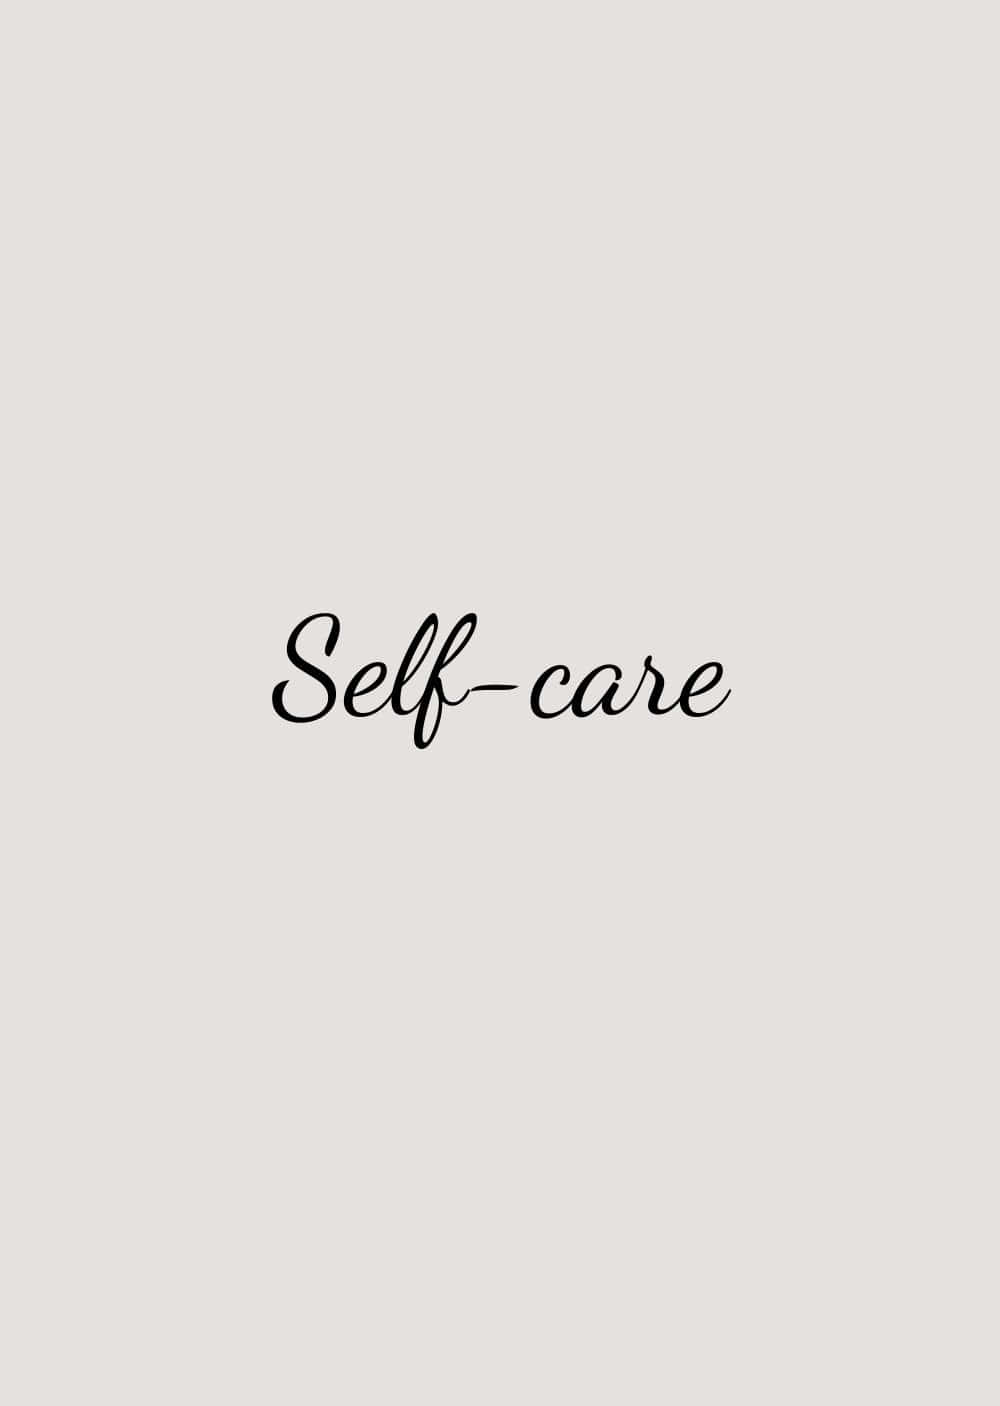 Shine from the inside out with Self Care" Wallpaper